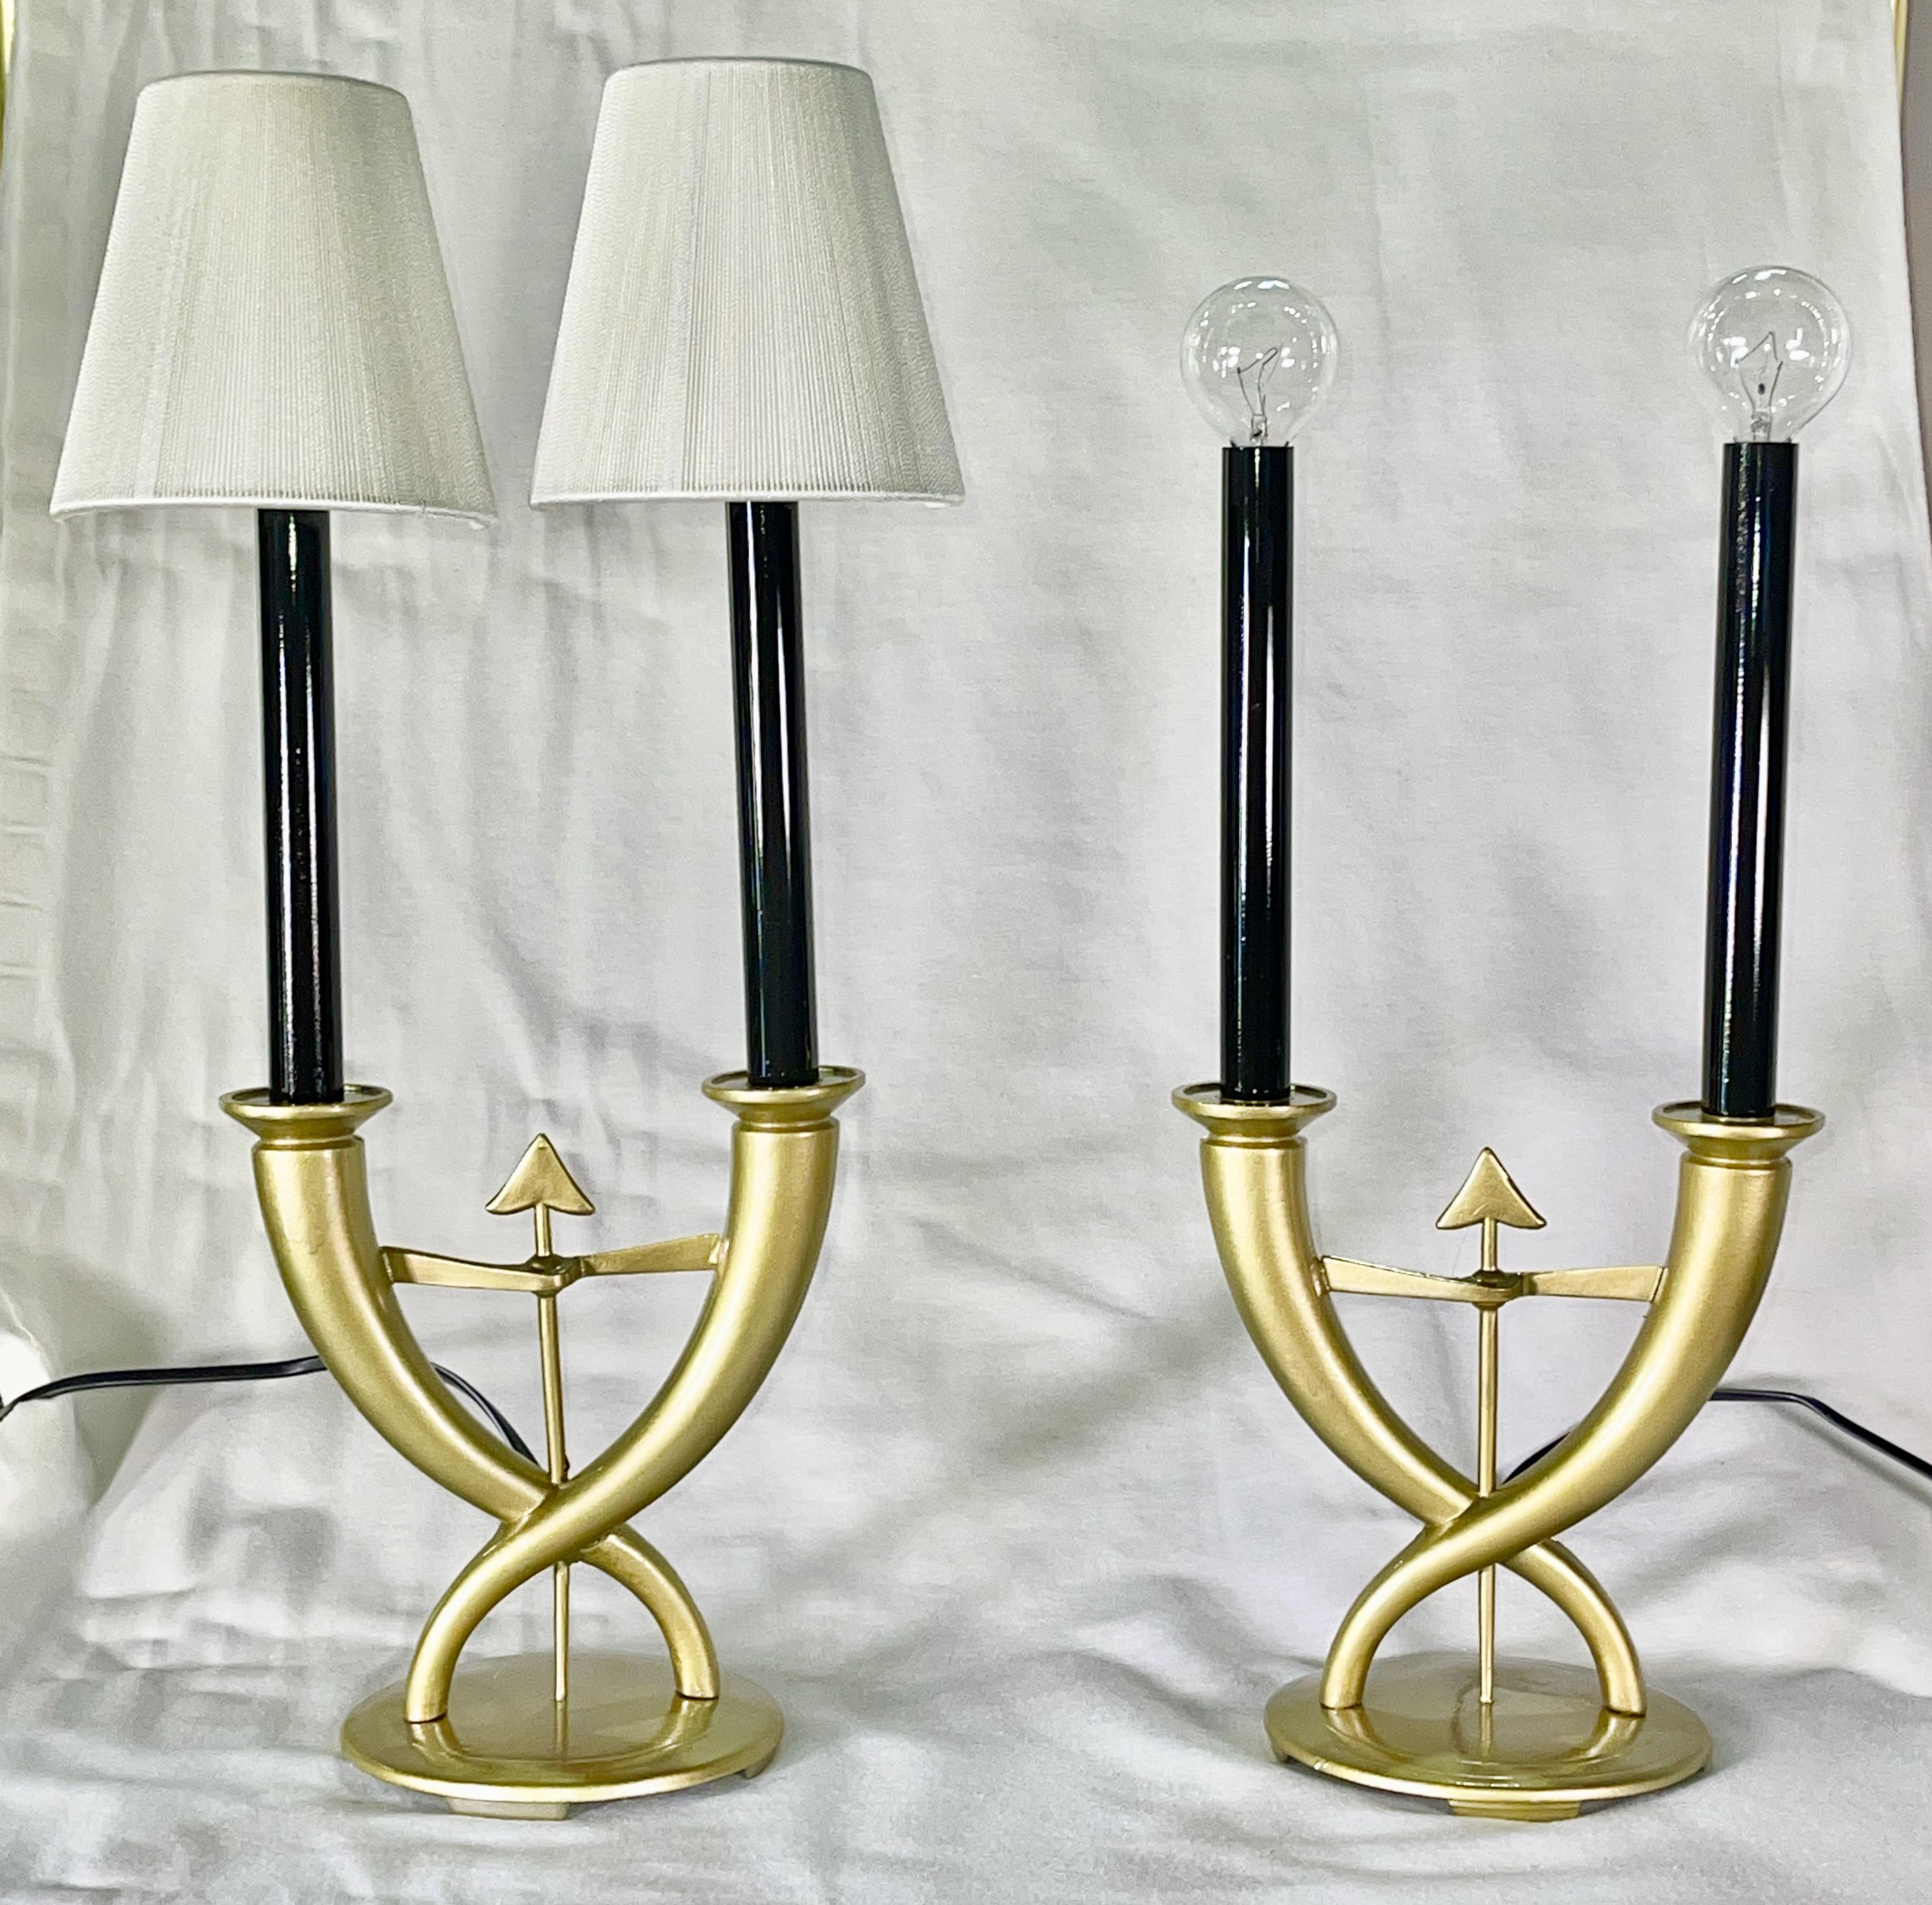 Pair of early edition Gio Ponti candelabra fleche lamps, an original cornucopia design of interlaced tapered horns framing a single arrow, imagined as a marriage symbol for the union of Tony Bouilhet, director of Christofle, with Carla Borletti,